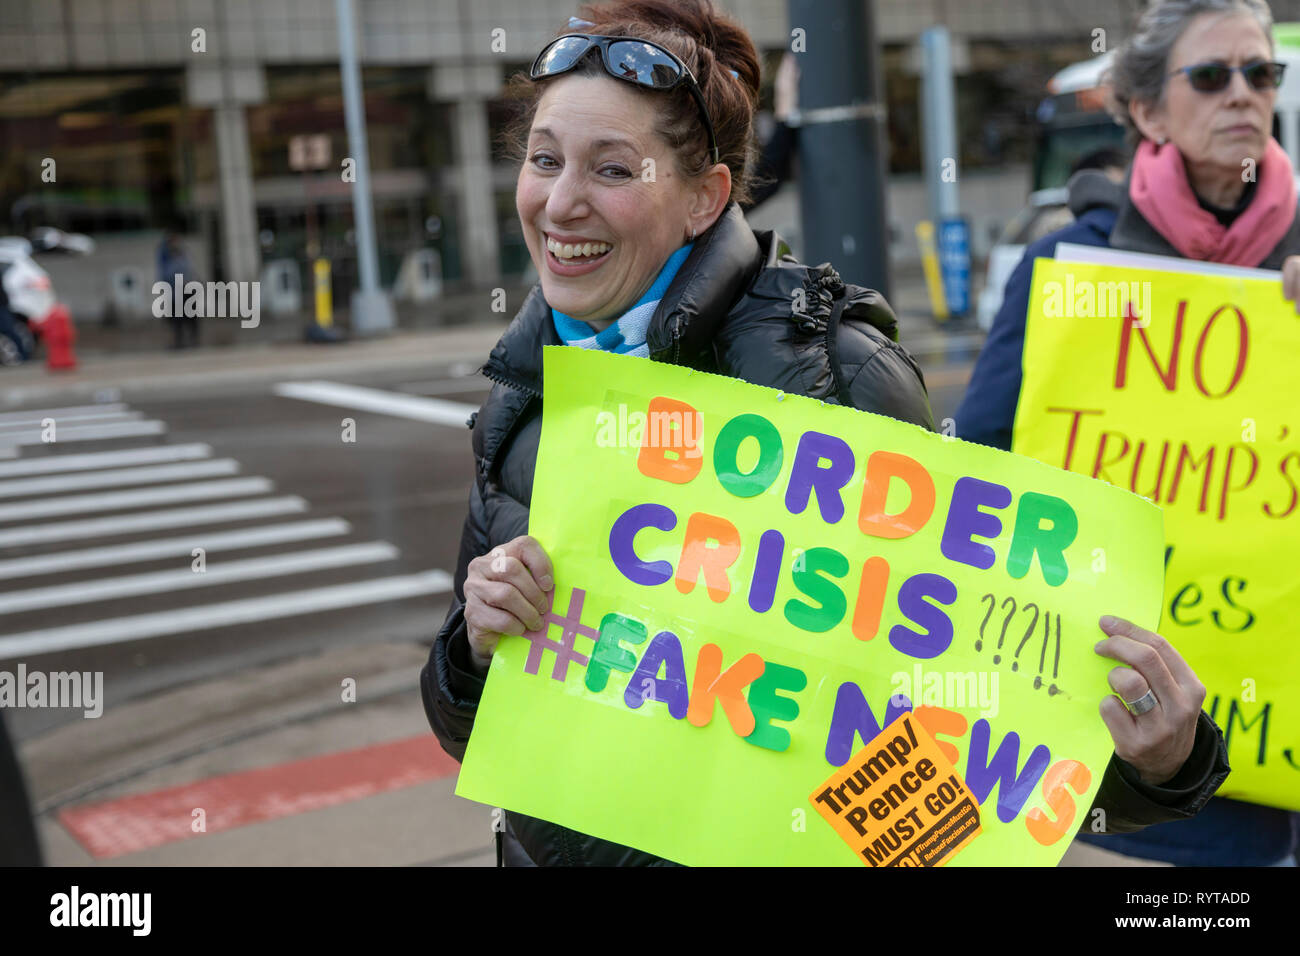 Detroit, Michigan USA - 14 March 2019 - Protesters picketed outside as immigration hard liners held a public meeting to promote construction of a wall along the Mexican border. The 'We Build the Wall' event promoted an organization of the same name that is trying to raise individual contributions to fund wall construction. Credit: Jim West/Alamy Live News Stock Photo